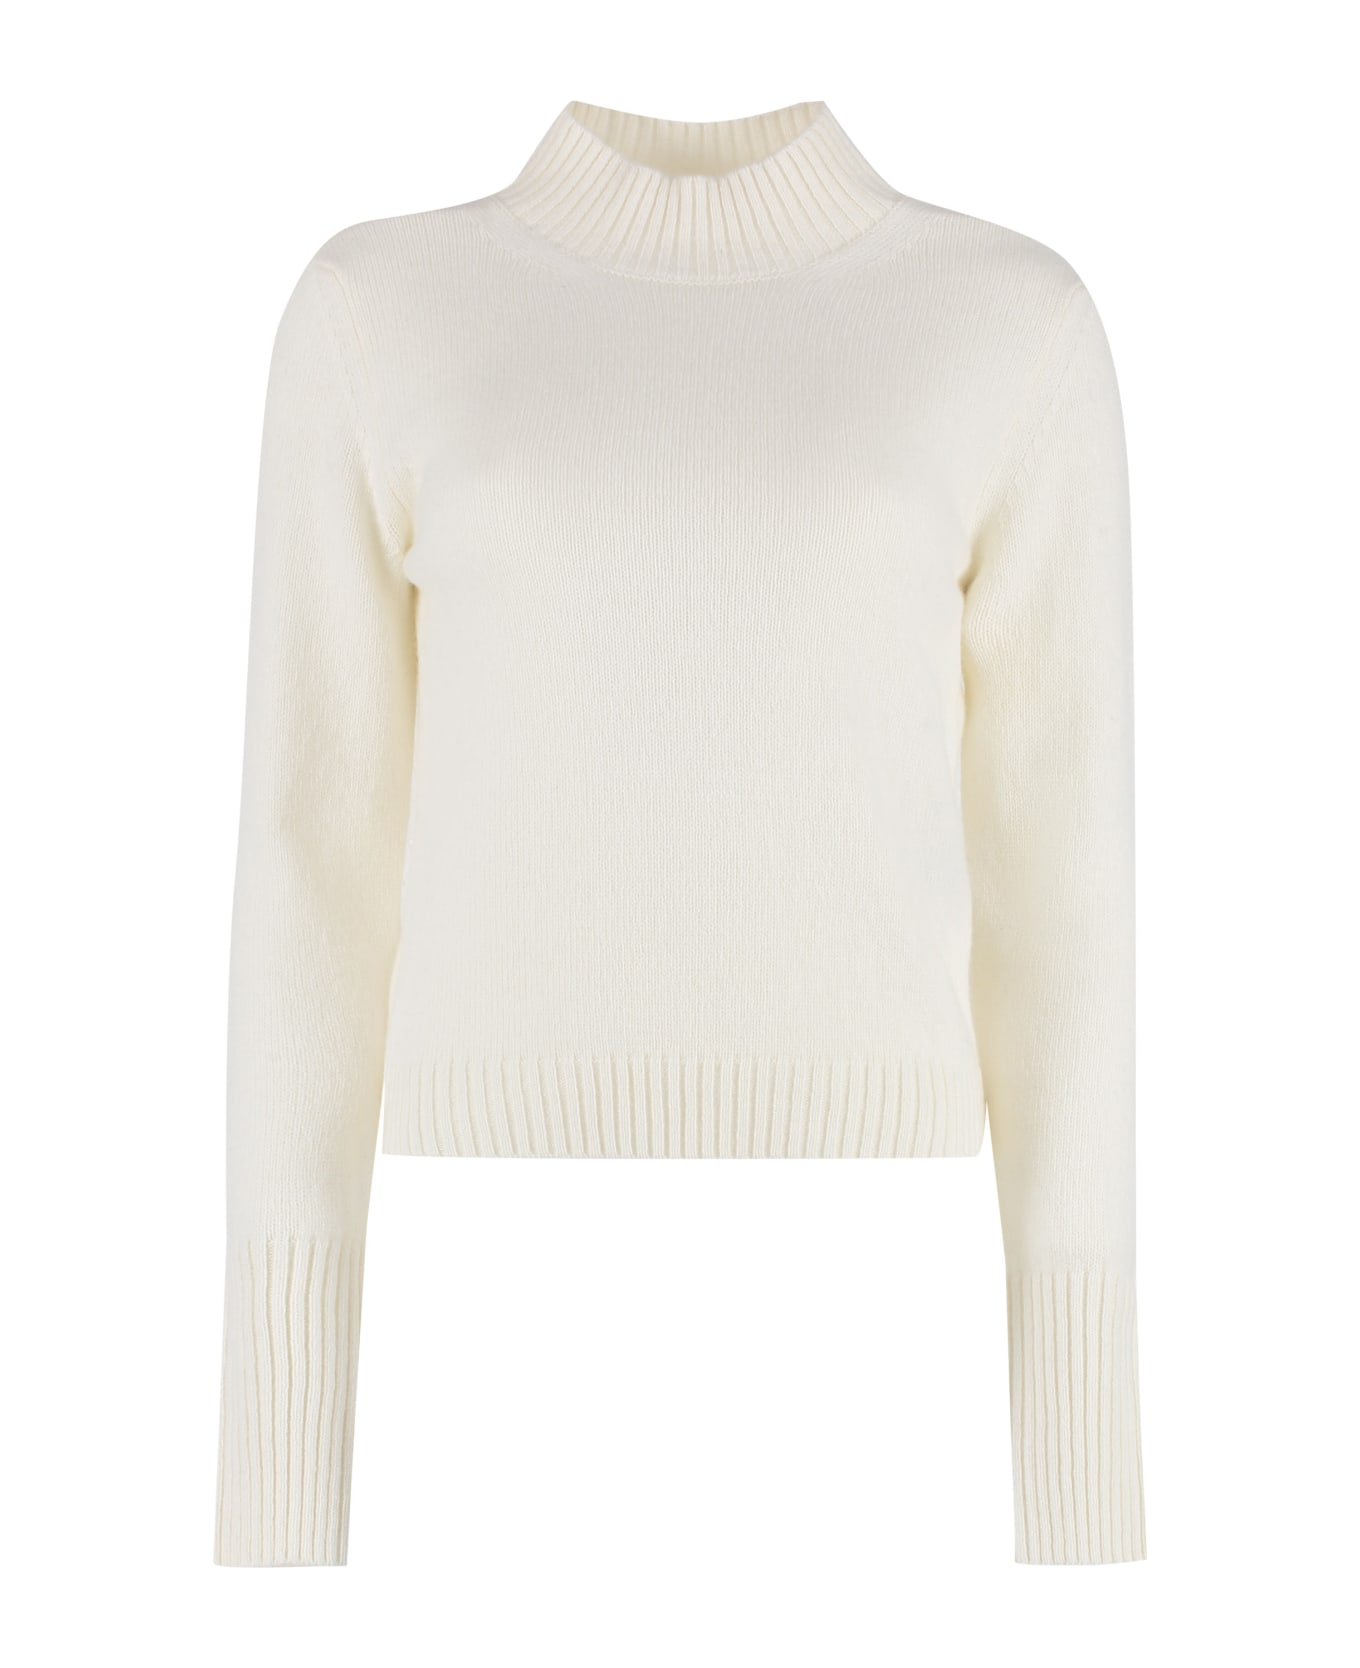 Federica Tosi Wool And Cashmere Sweater - panna ニットウェア